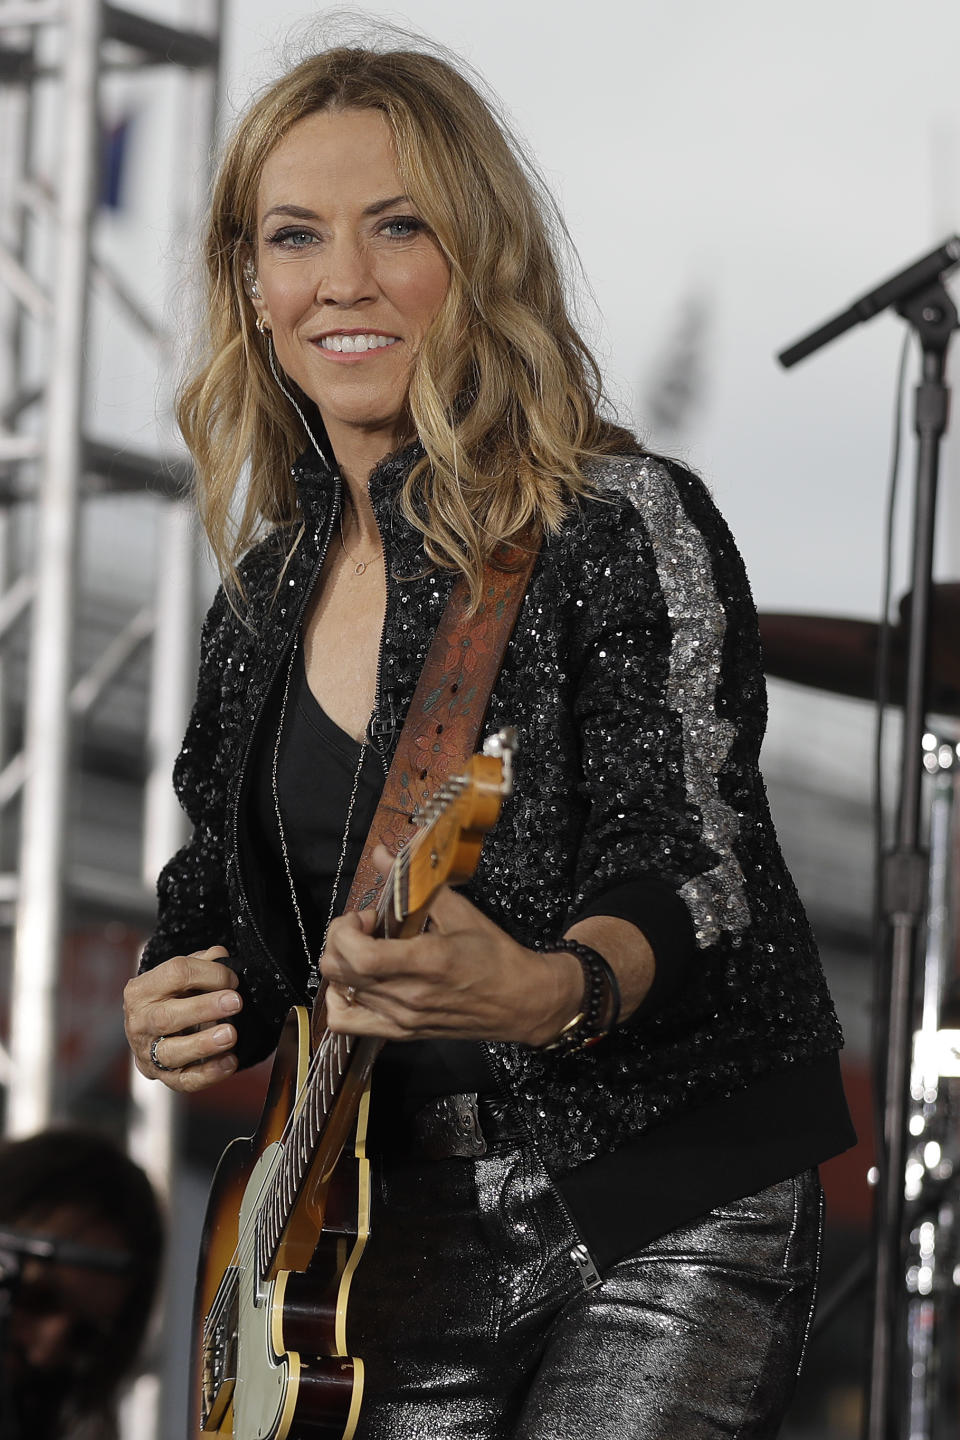 Sheryl Crow performs on NBC's "Today" show at the Indianapolis Motor Speedway, Thursday, May 23, 2019, in Indianapolis. (AP Photo/Darron Cummings)